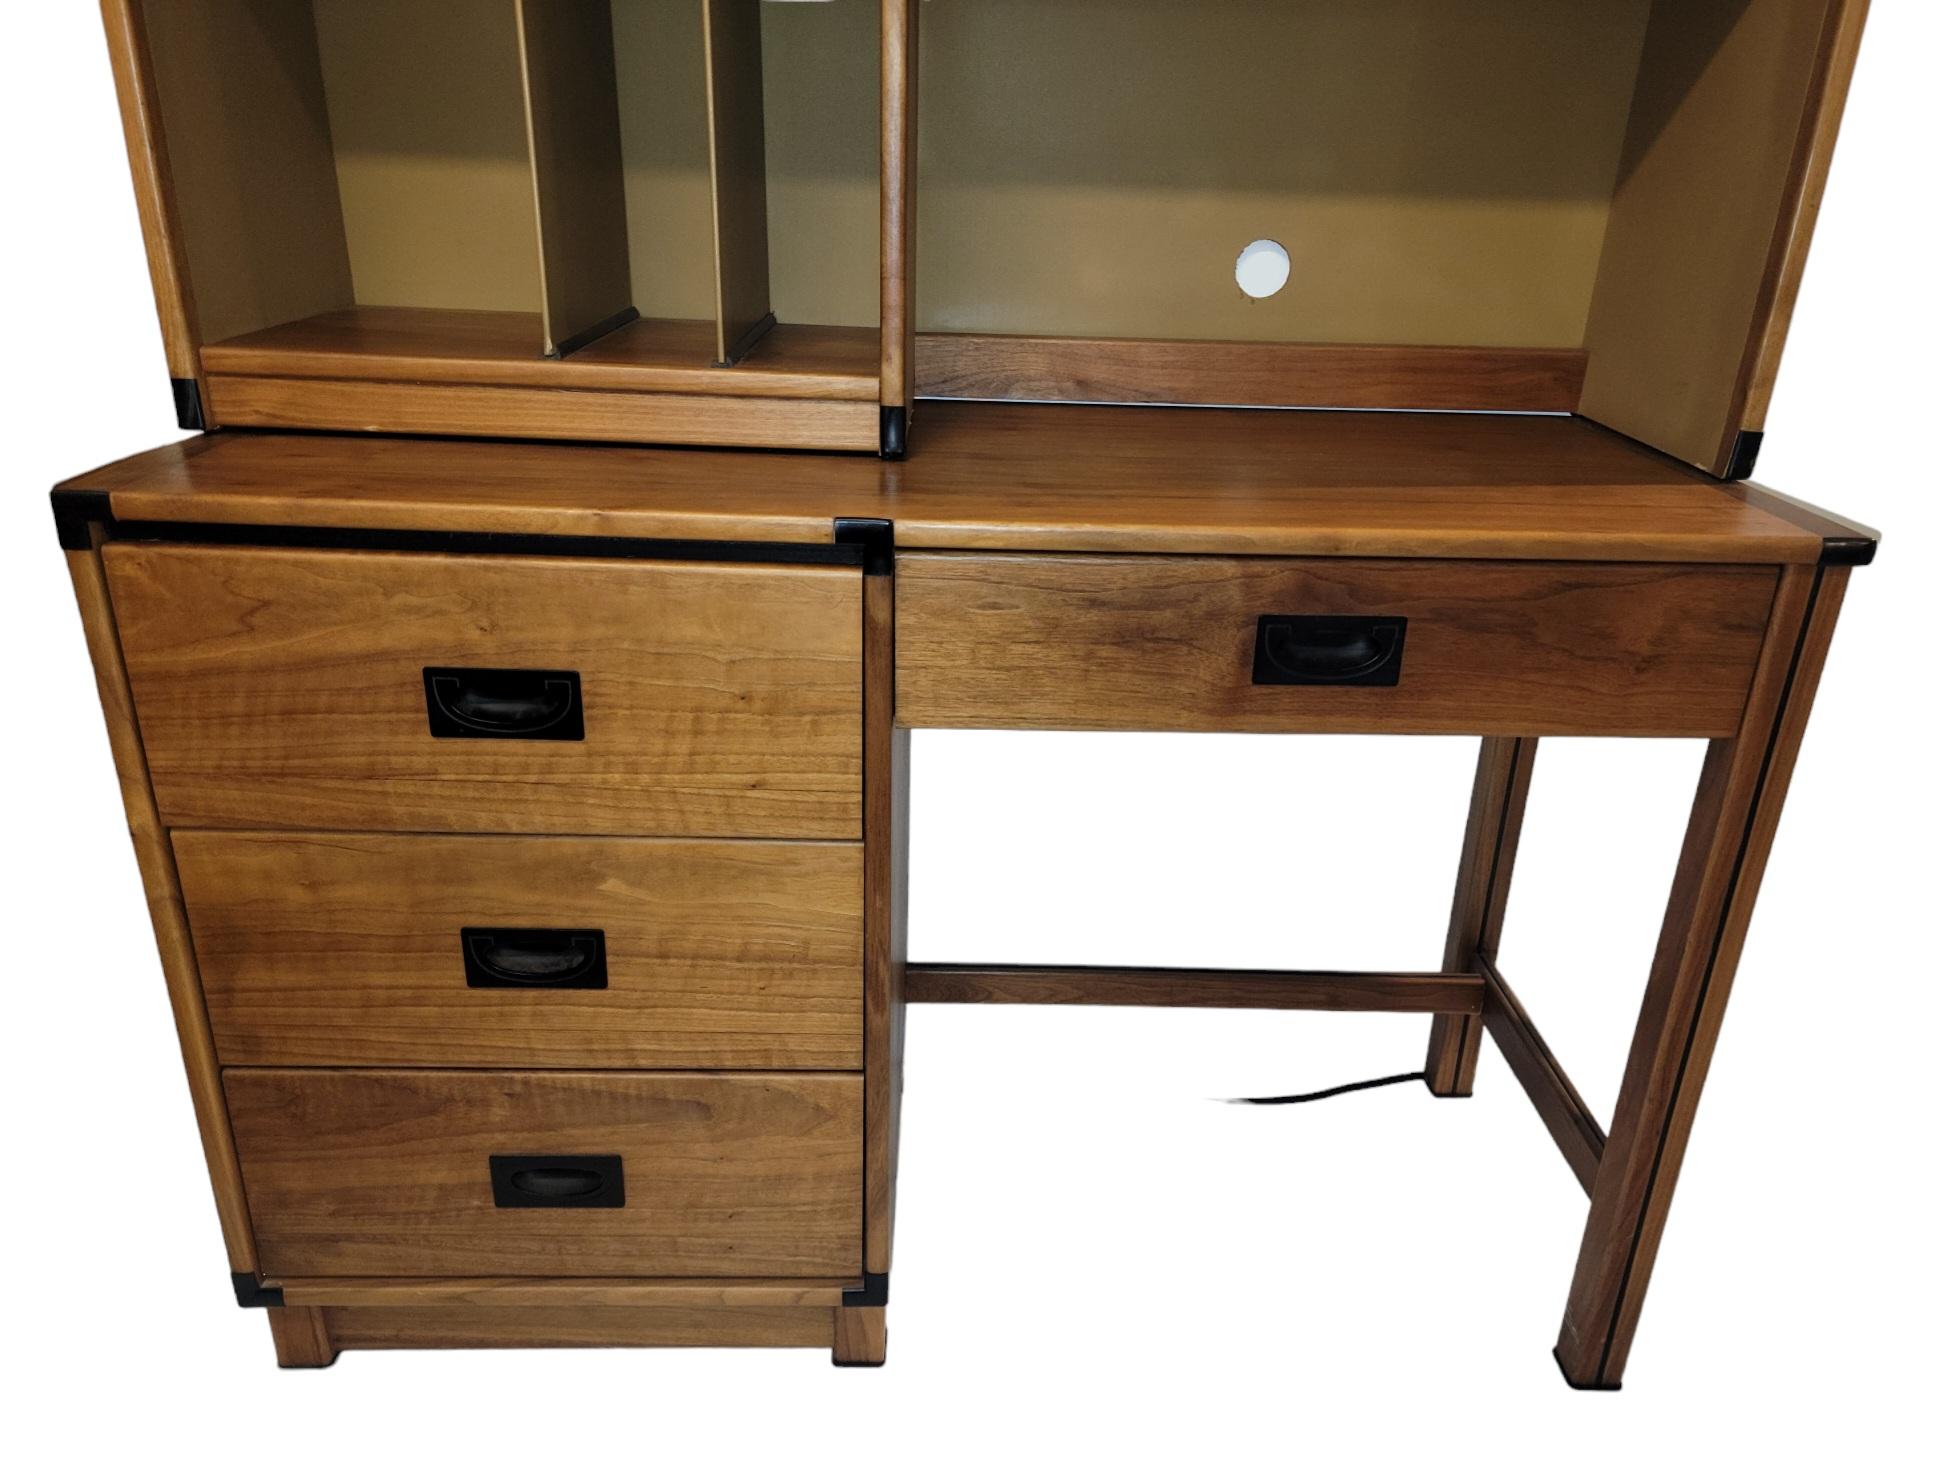 Mid Century Drexel Danish Desk with shelves. This desk set has a lot to offer is the foot print it provides. The desk has a great area for work space and offers plenty of shelf space to keep you space organized. This desk set has a small 2 door